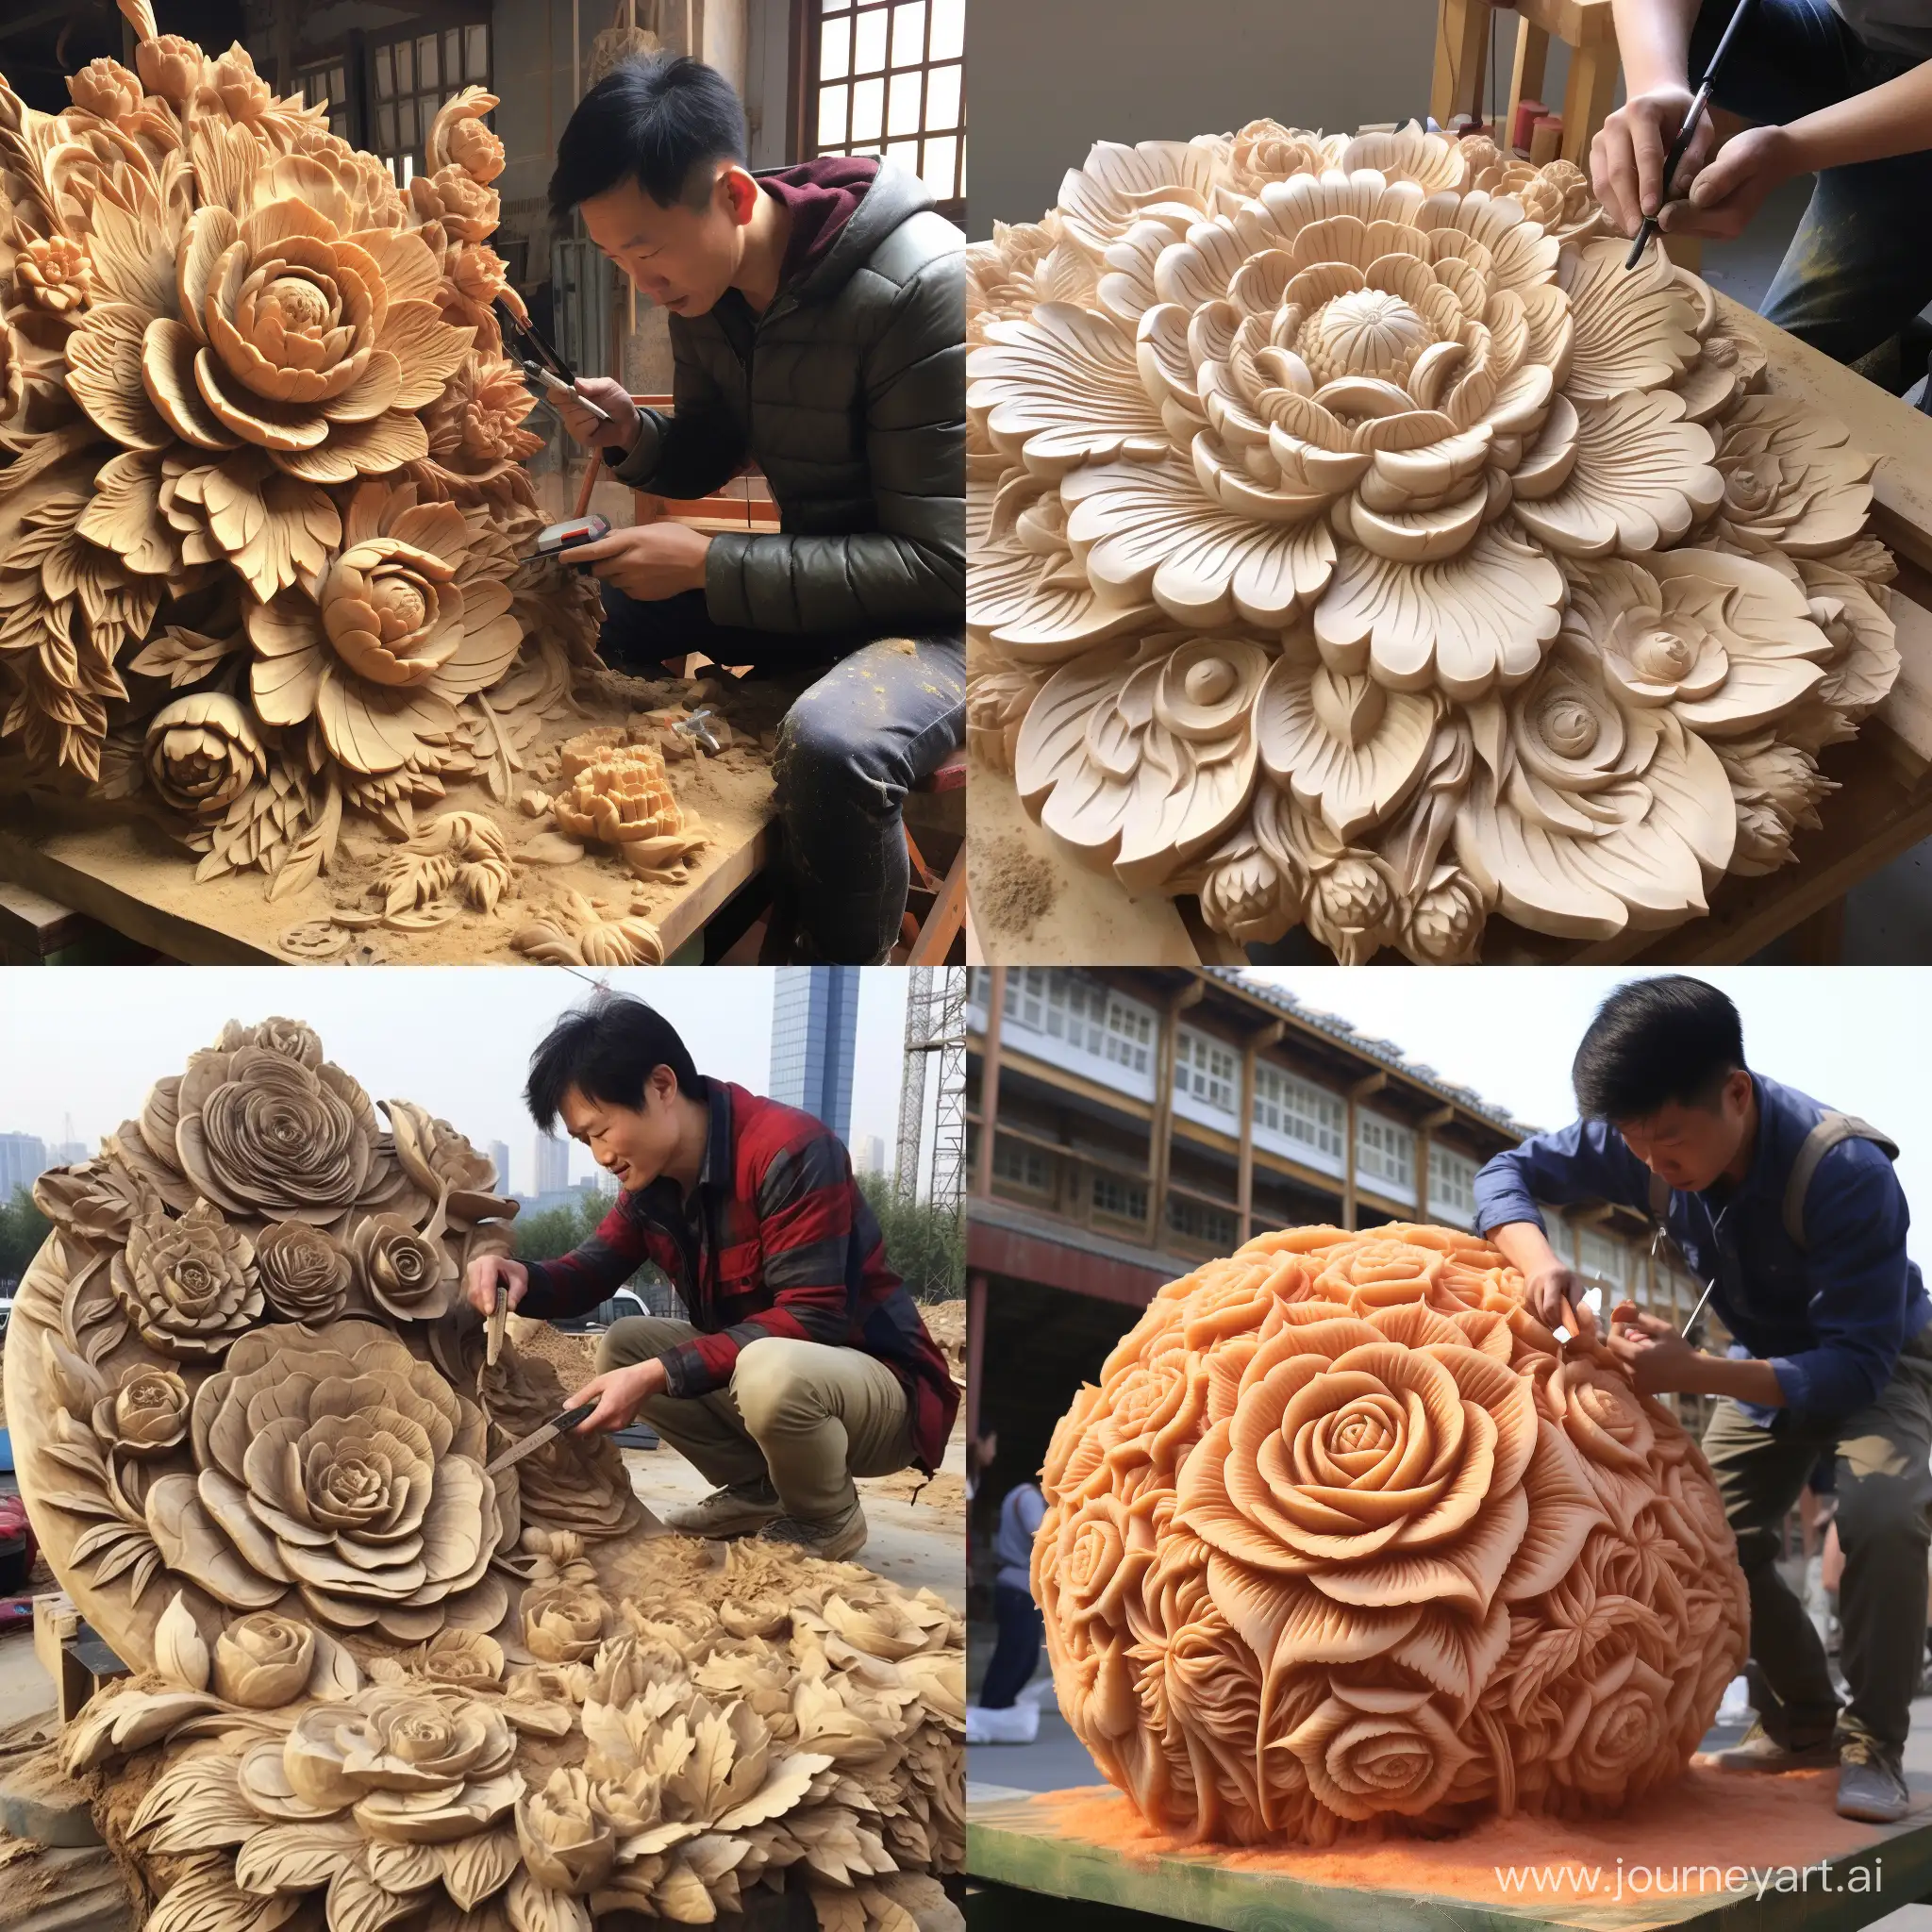 Artistic-Endeavor-Intricate-Floral-Carvings-on-Ceramic-Surface